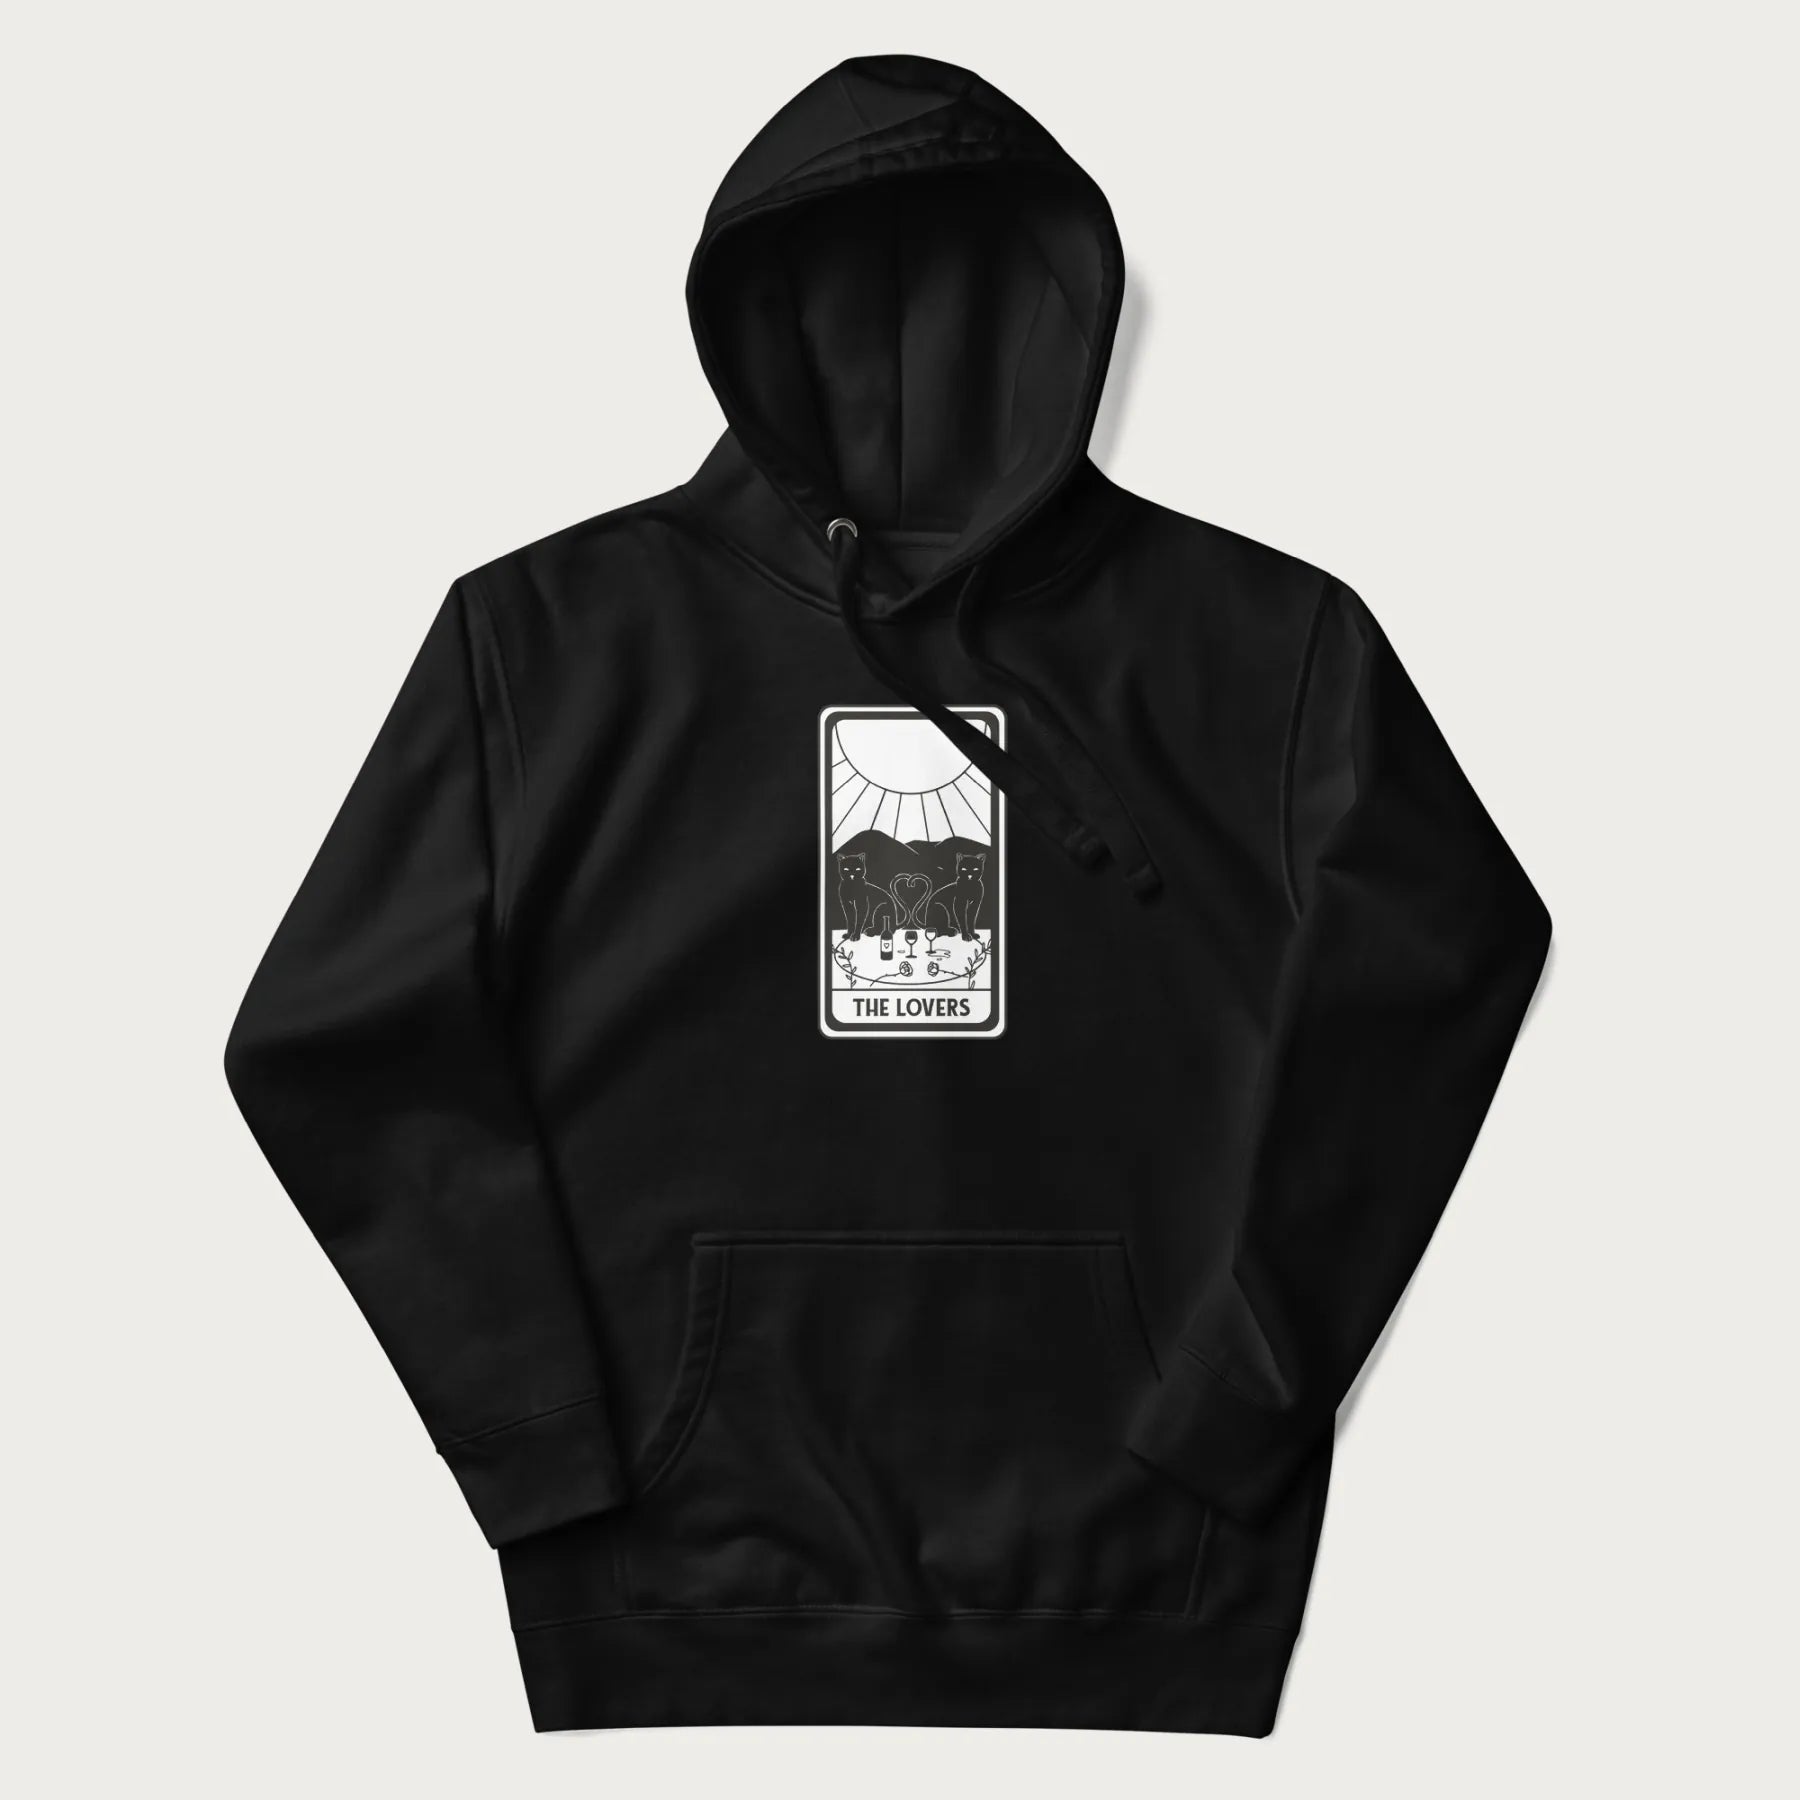 Black hoodie with a 'The Lovers' tarot card graphic of two cats with intertwined tails forming a heart, wine, and roses.